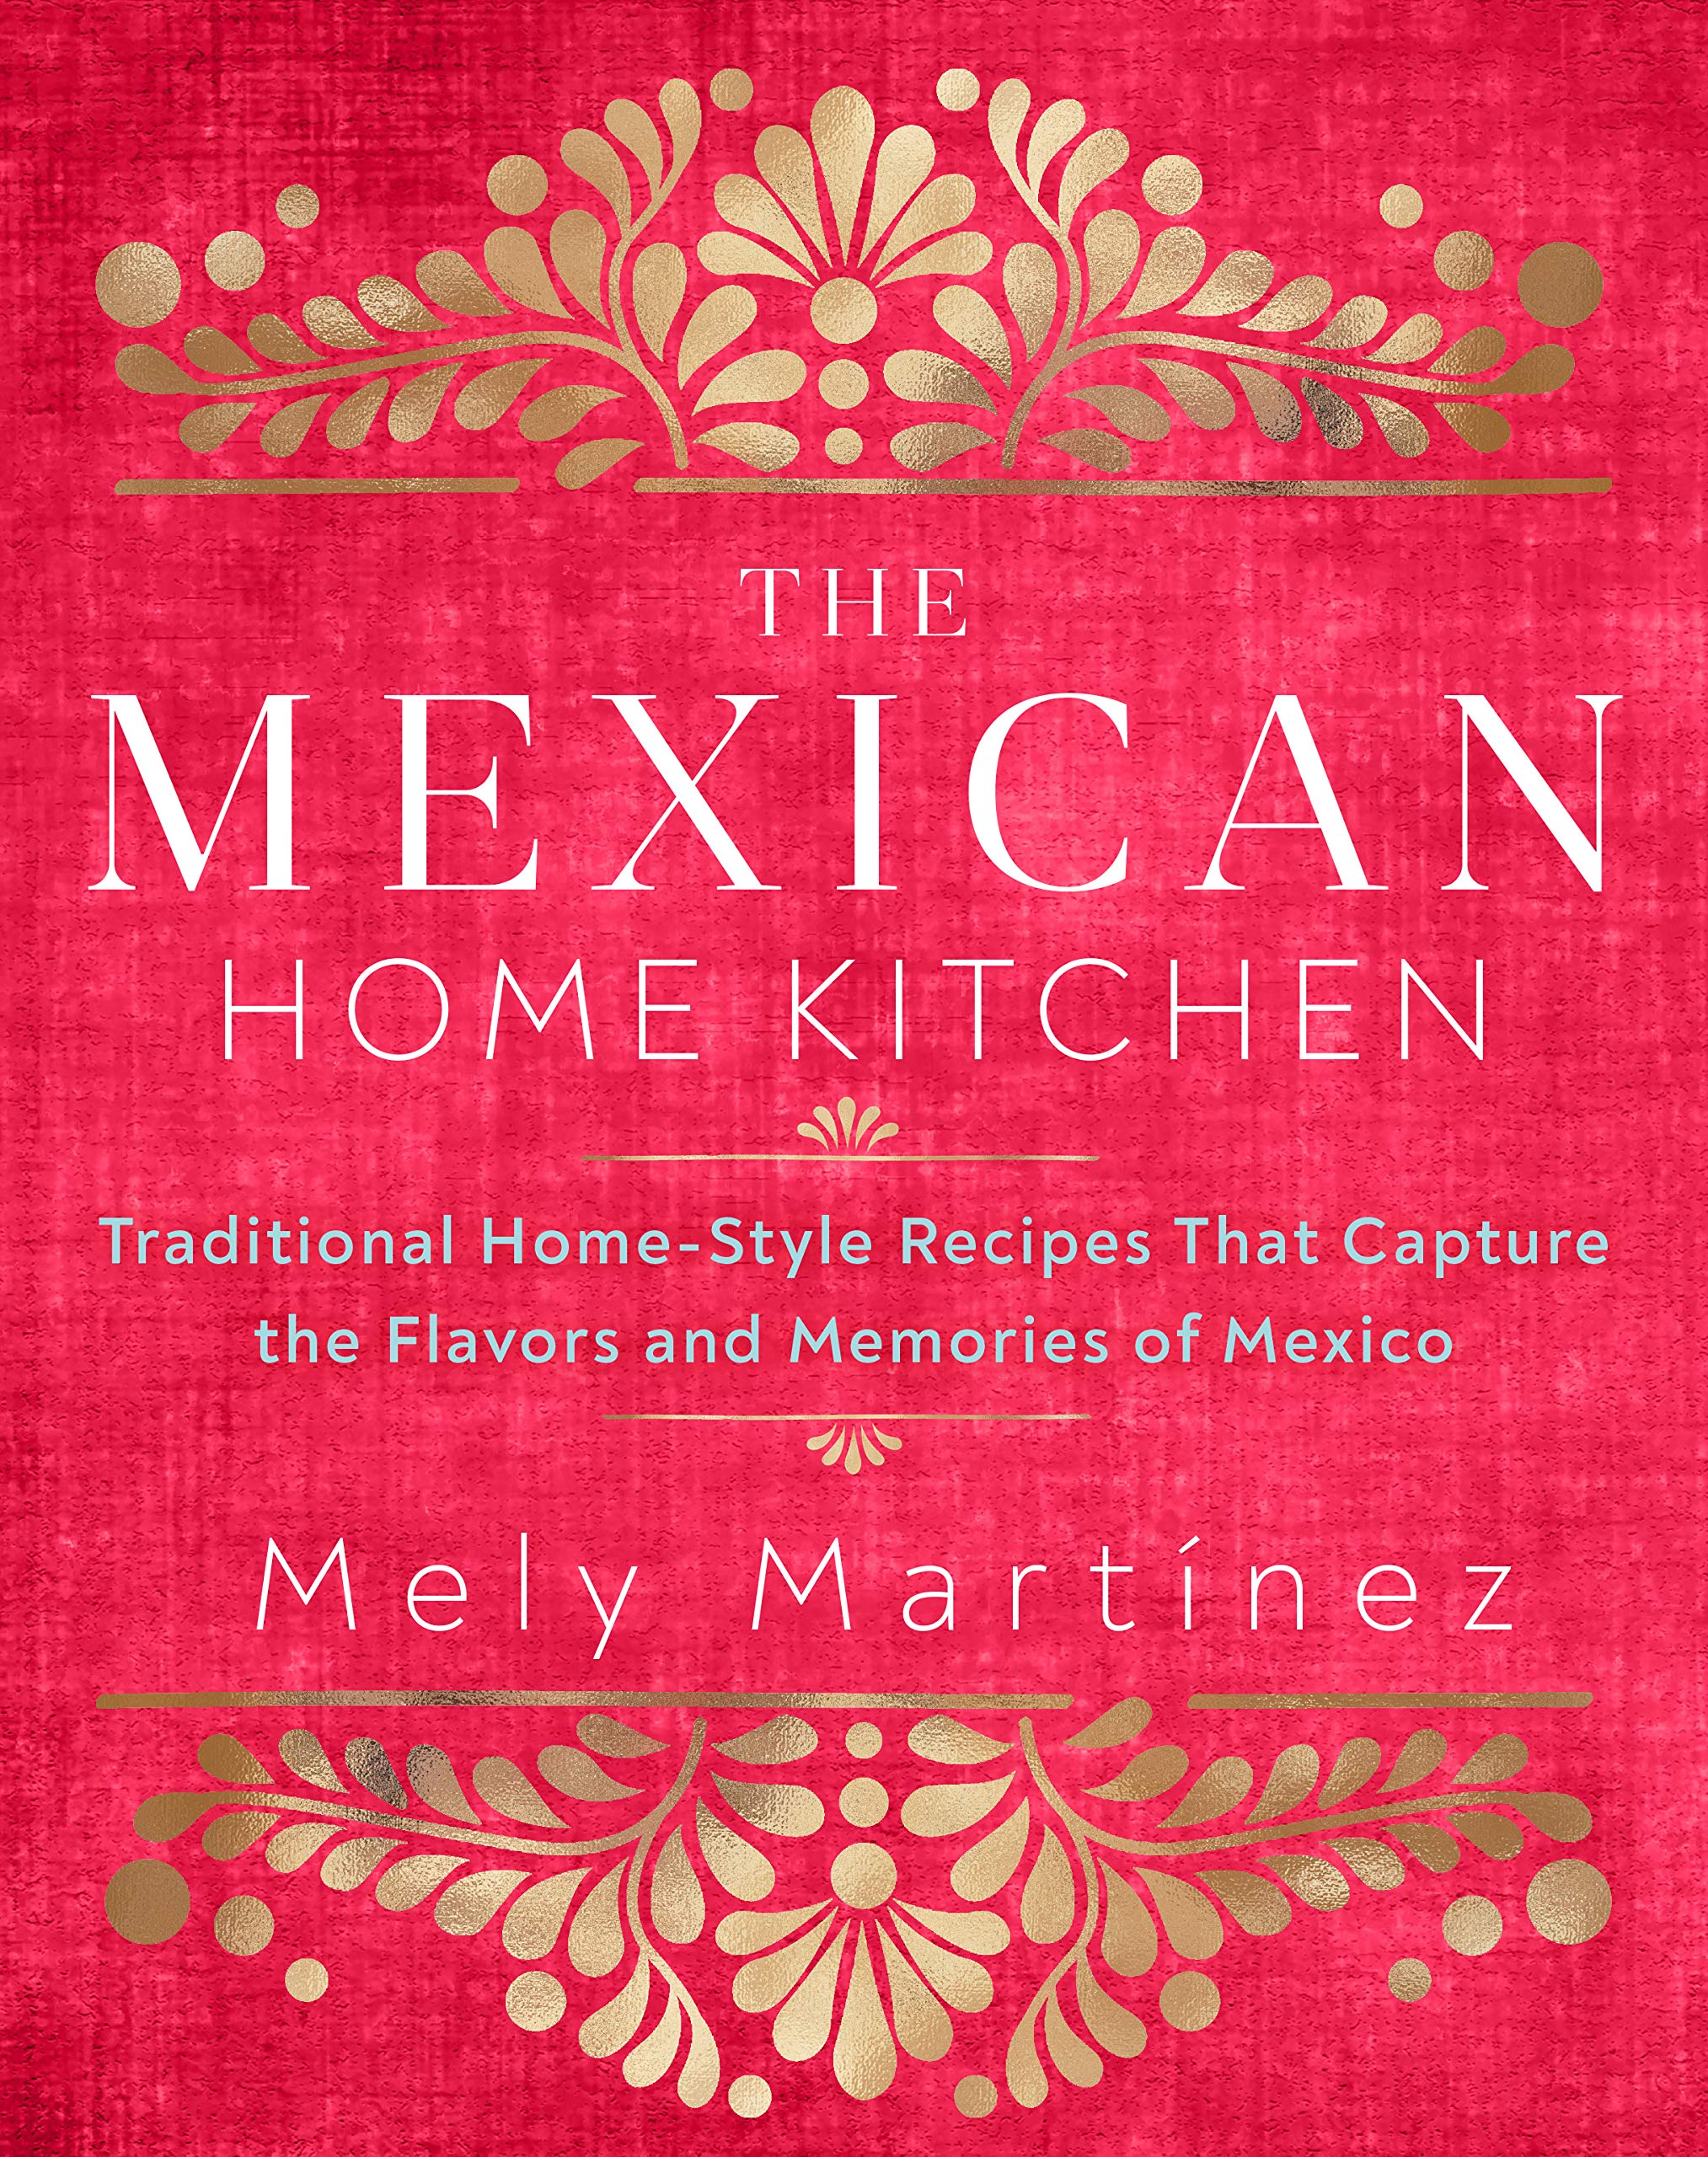 The Mexican Home Kitchen (Mely Martínez)